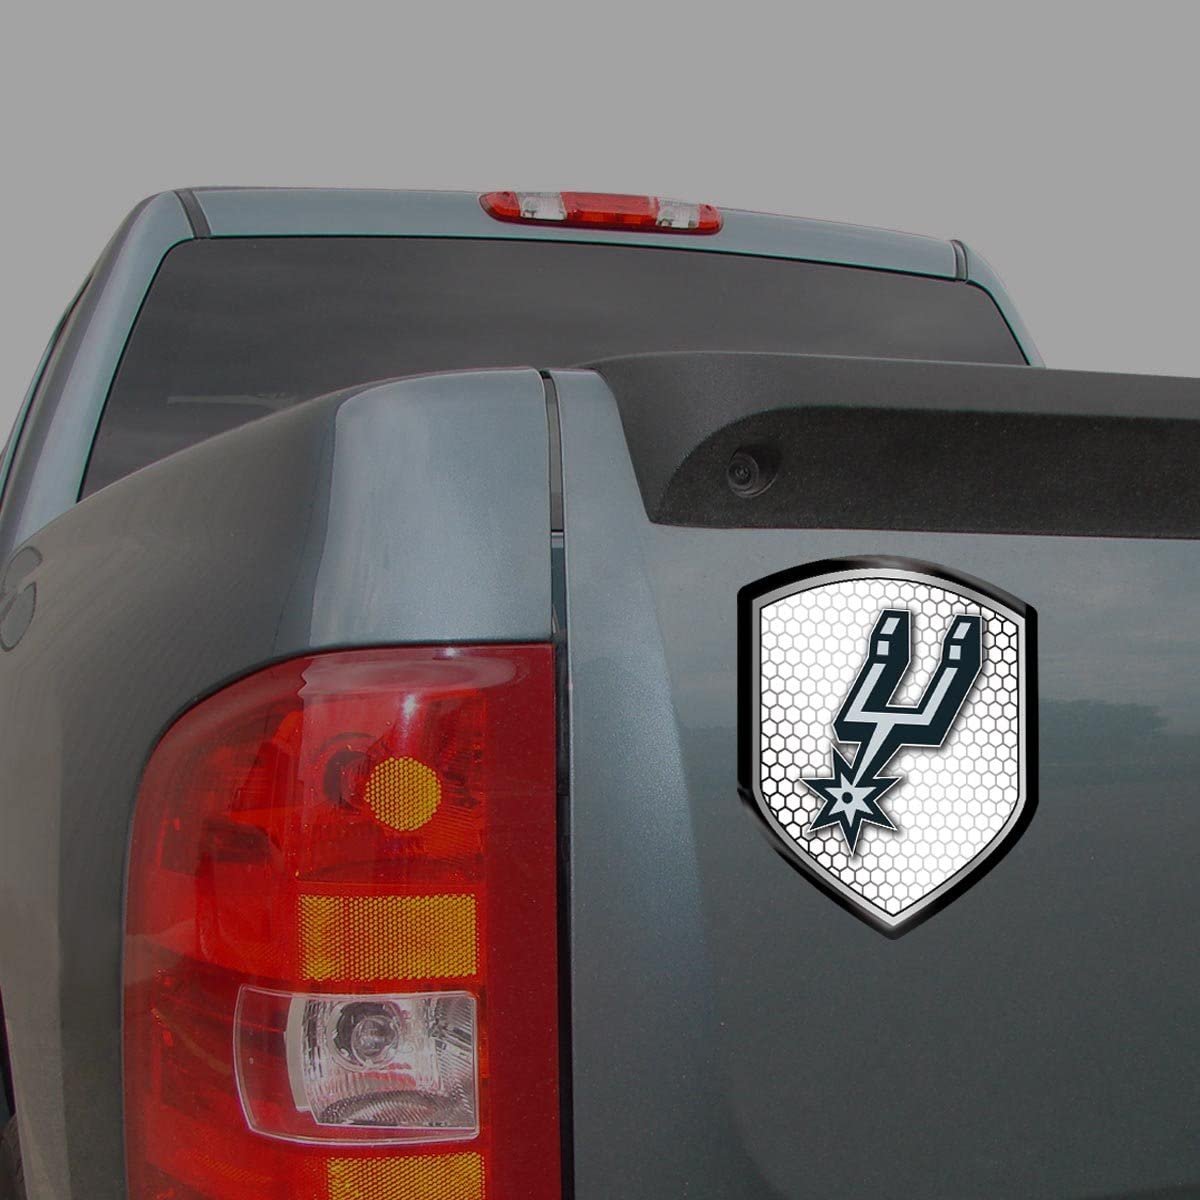 San Antonio Spurs High Intensity Reflector, Shield Shape, Raised Decal Sticker, 2.5x3.5 Inch, Home or Auto, Full Adhesive Backing